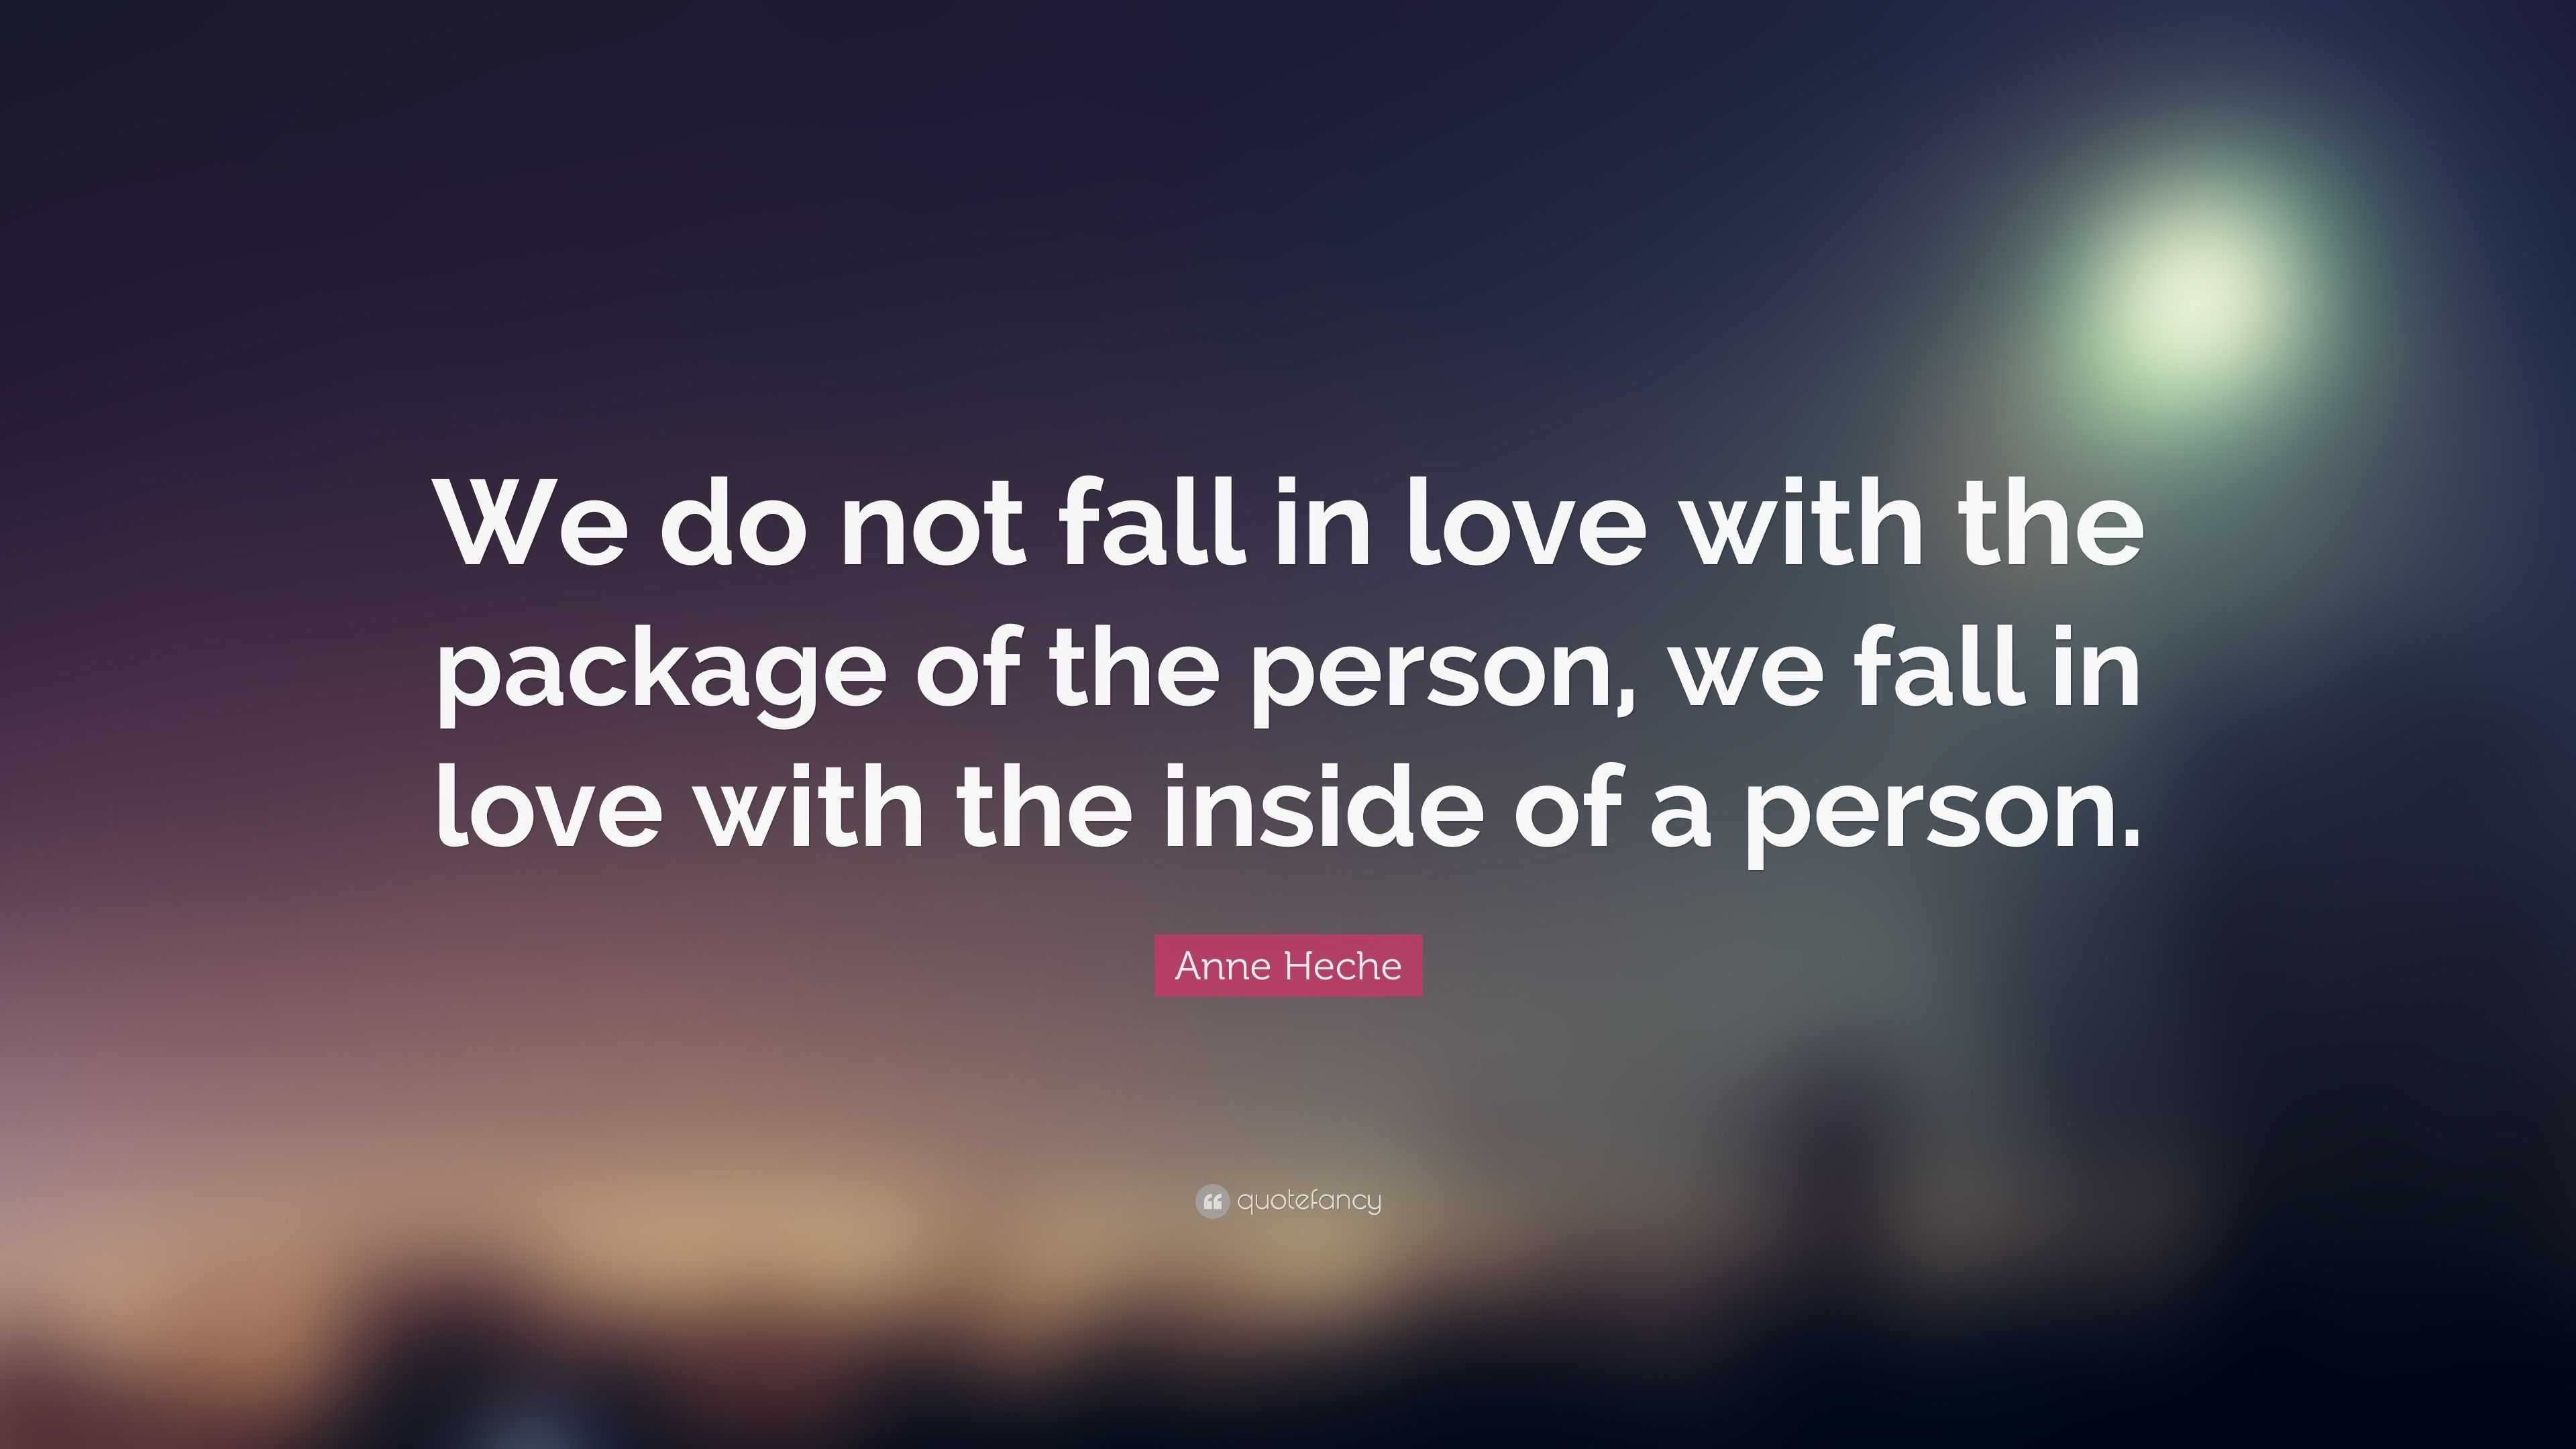 Anne Heche Quote “We do not fall in love with the package of the